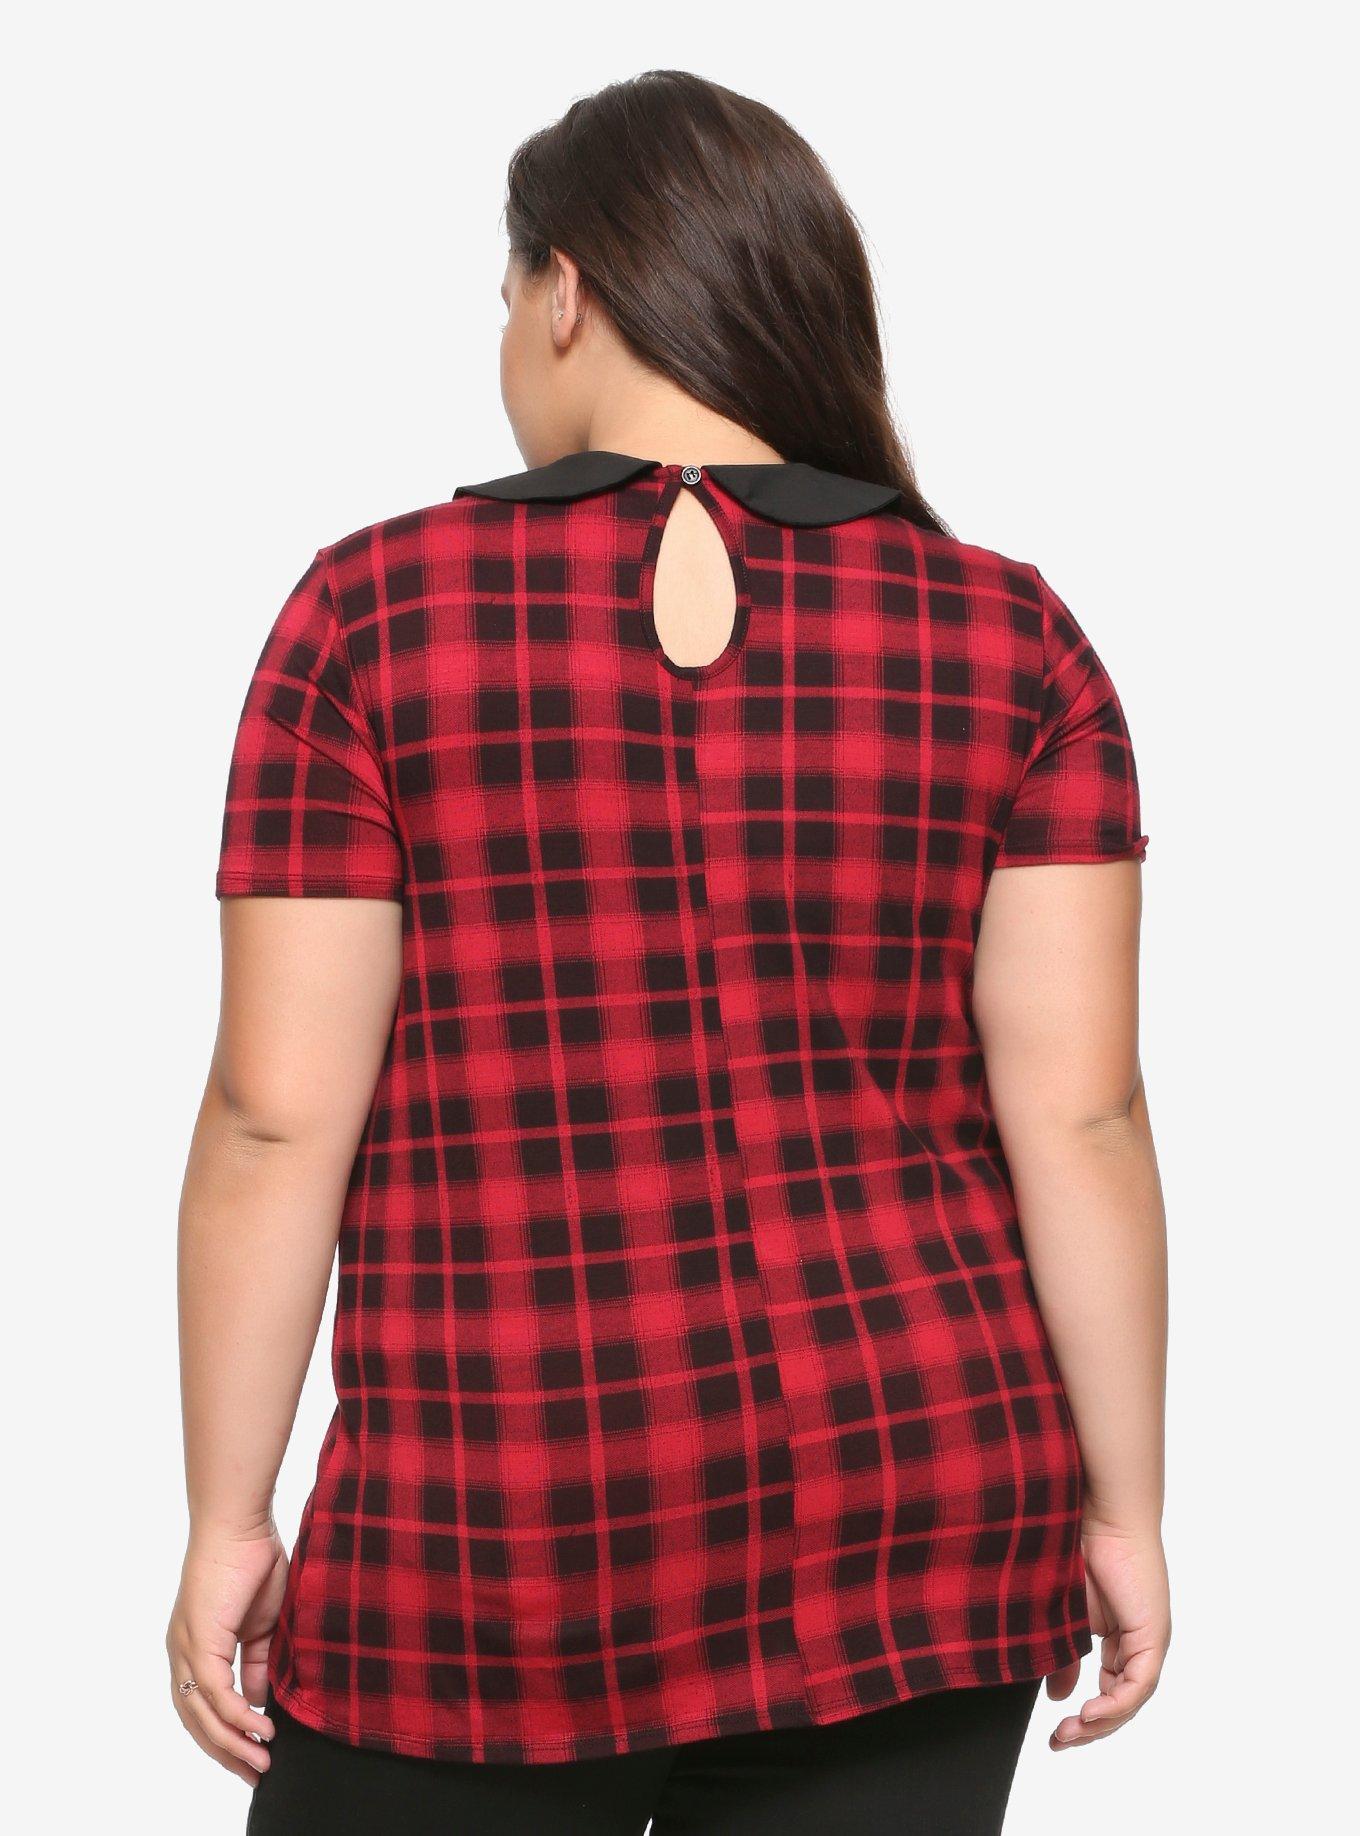 Red Plaid Collared Girls T-Shirt Plus Size, PLAID - RED, alternate